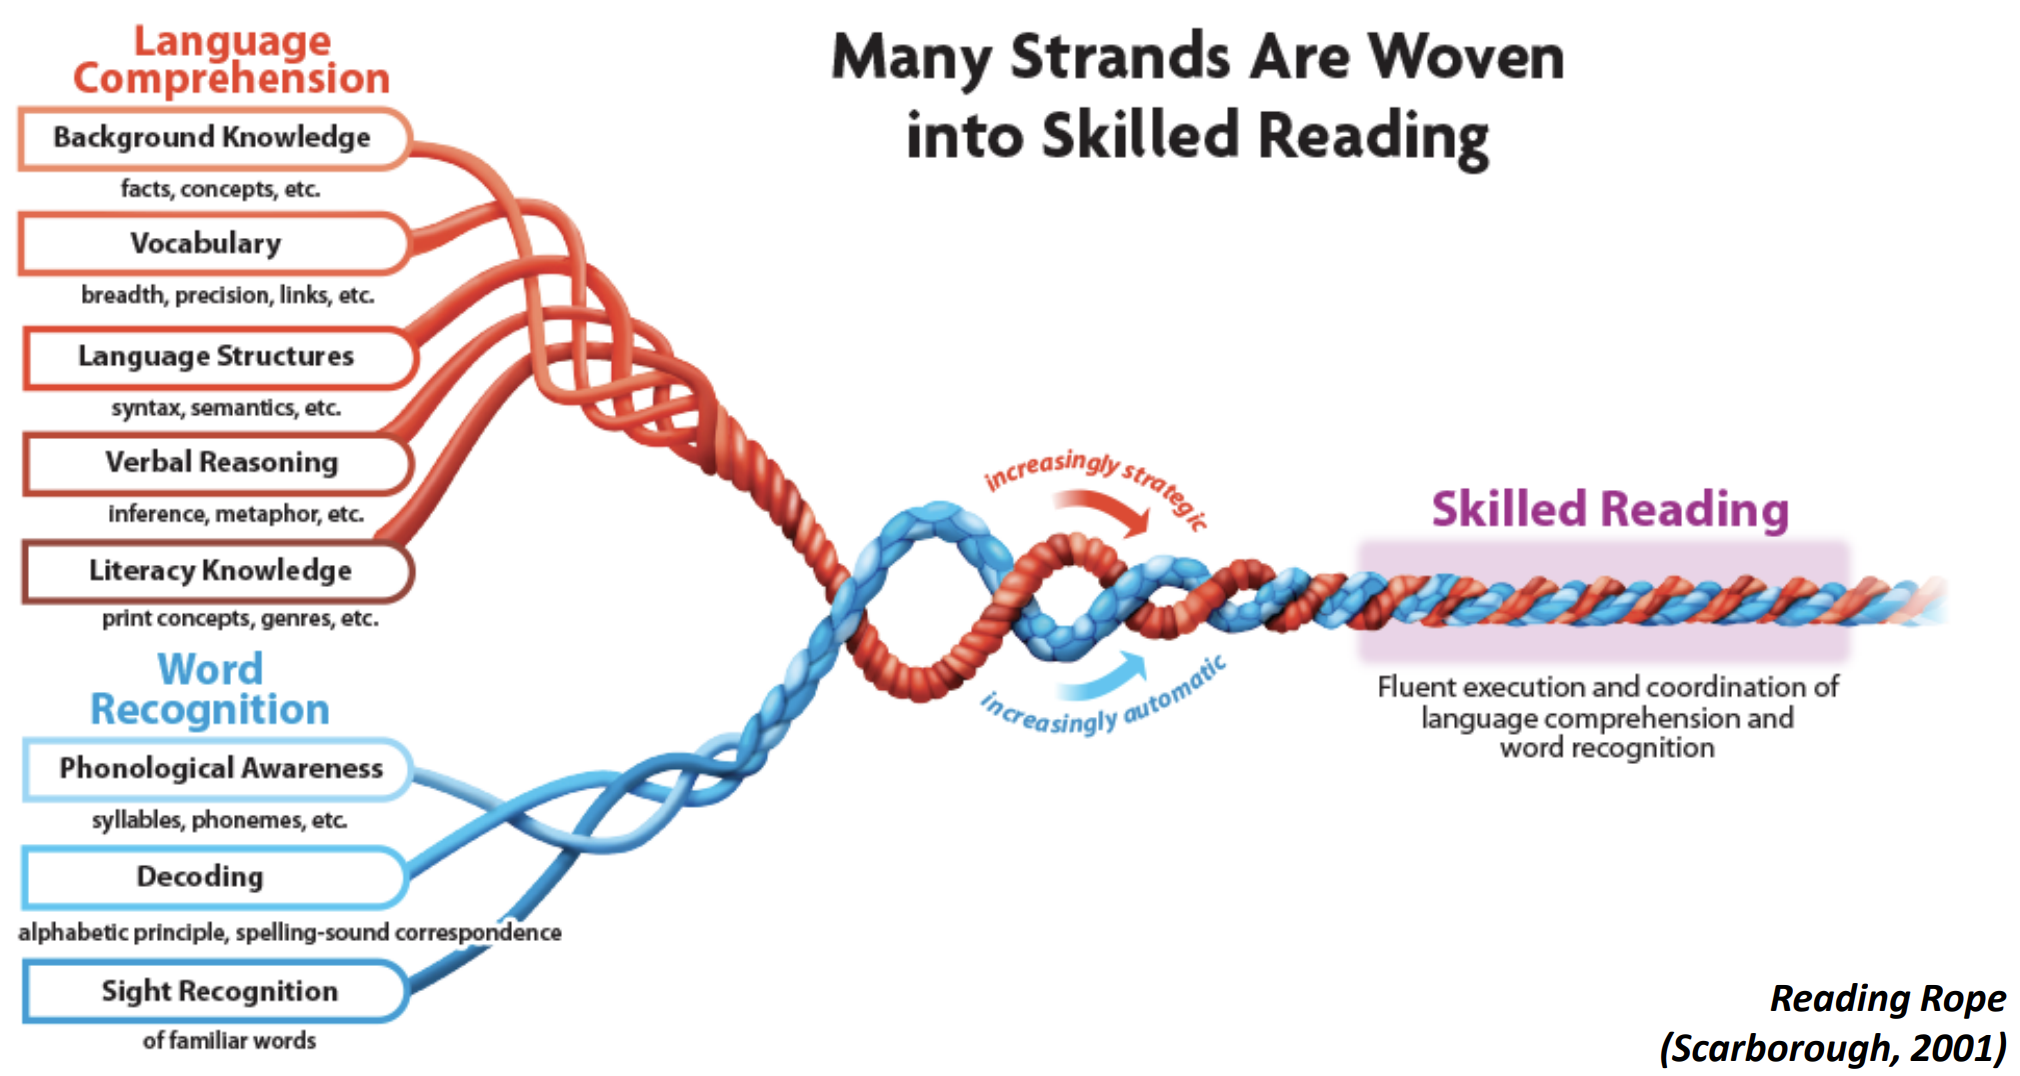 Strands of the rope work show the complexity of reading comprehension Strands weave together to enable comprehension. A breakdown in comprehension can occur if there is a 'break' in a strand. Red refers to Language, blue refers to decoding